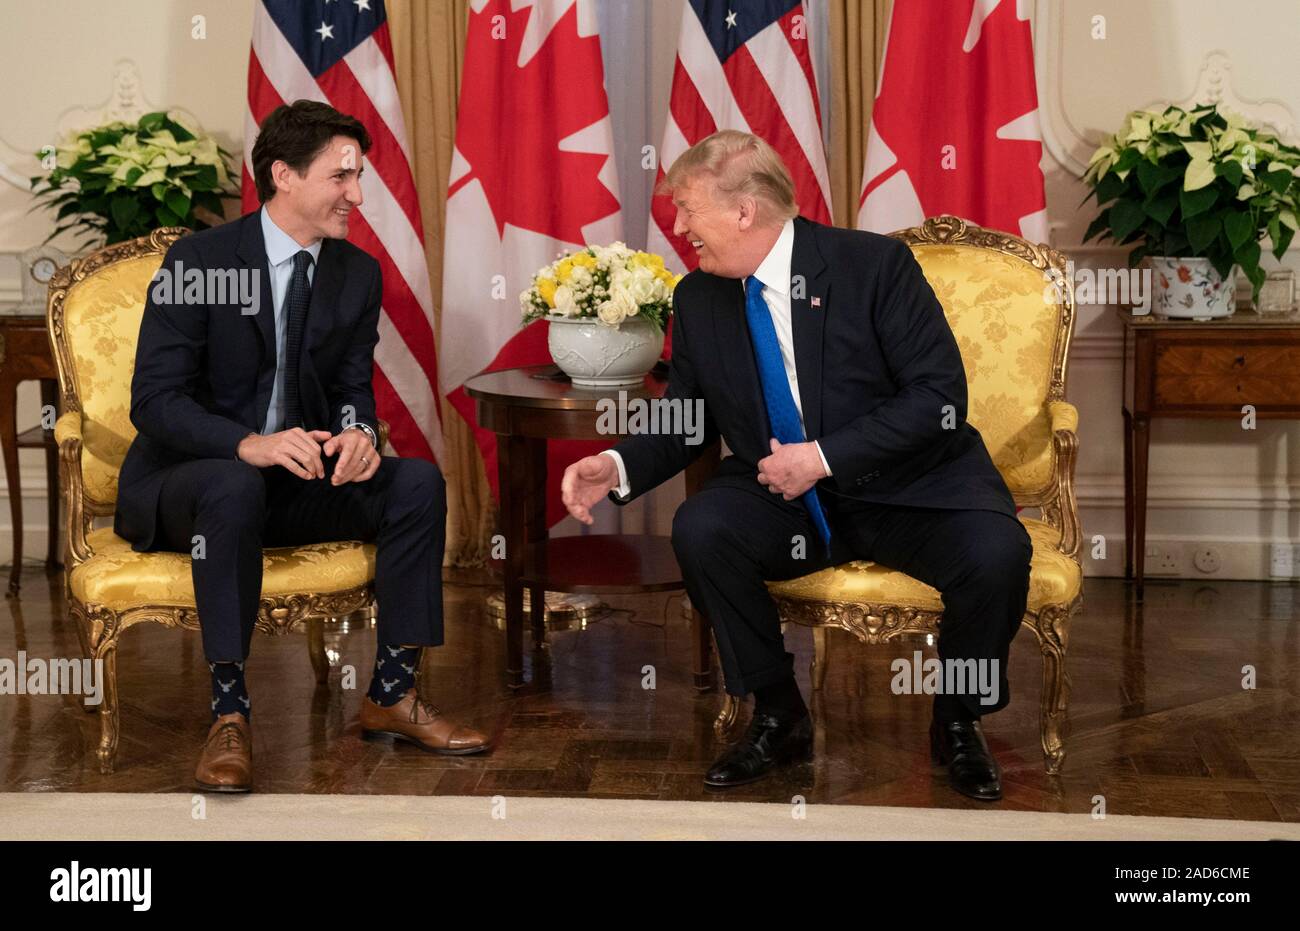 London, UK. 03 December, 2019. U.S. President Donald Trump and Canadian Prime Minister Justin Trudeau, left, hold a bilateral meeting prior to the start of the NATO Summit at Winfield House December 3, 2019 in London, UK.  Credit: Shealah Craighead/Planetpix/Alamy Live News Stock Photo